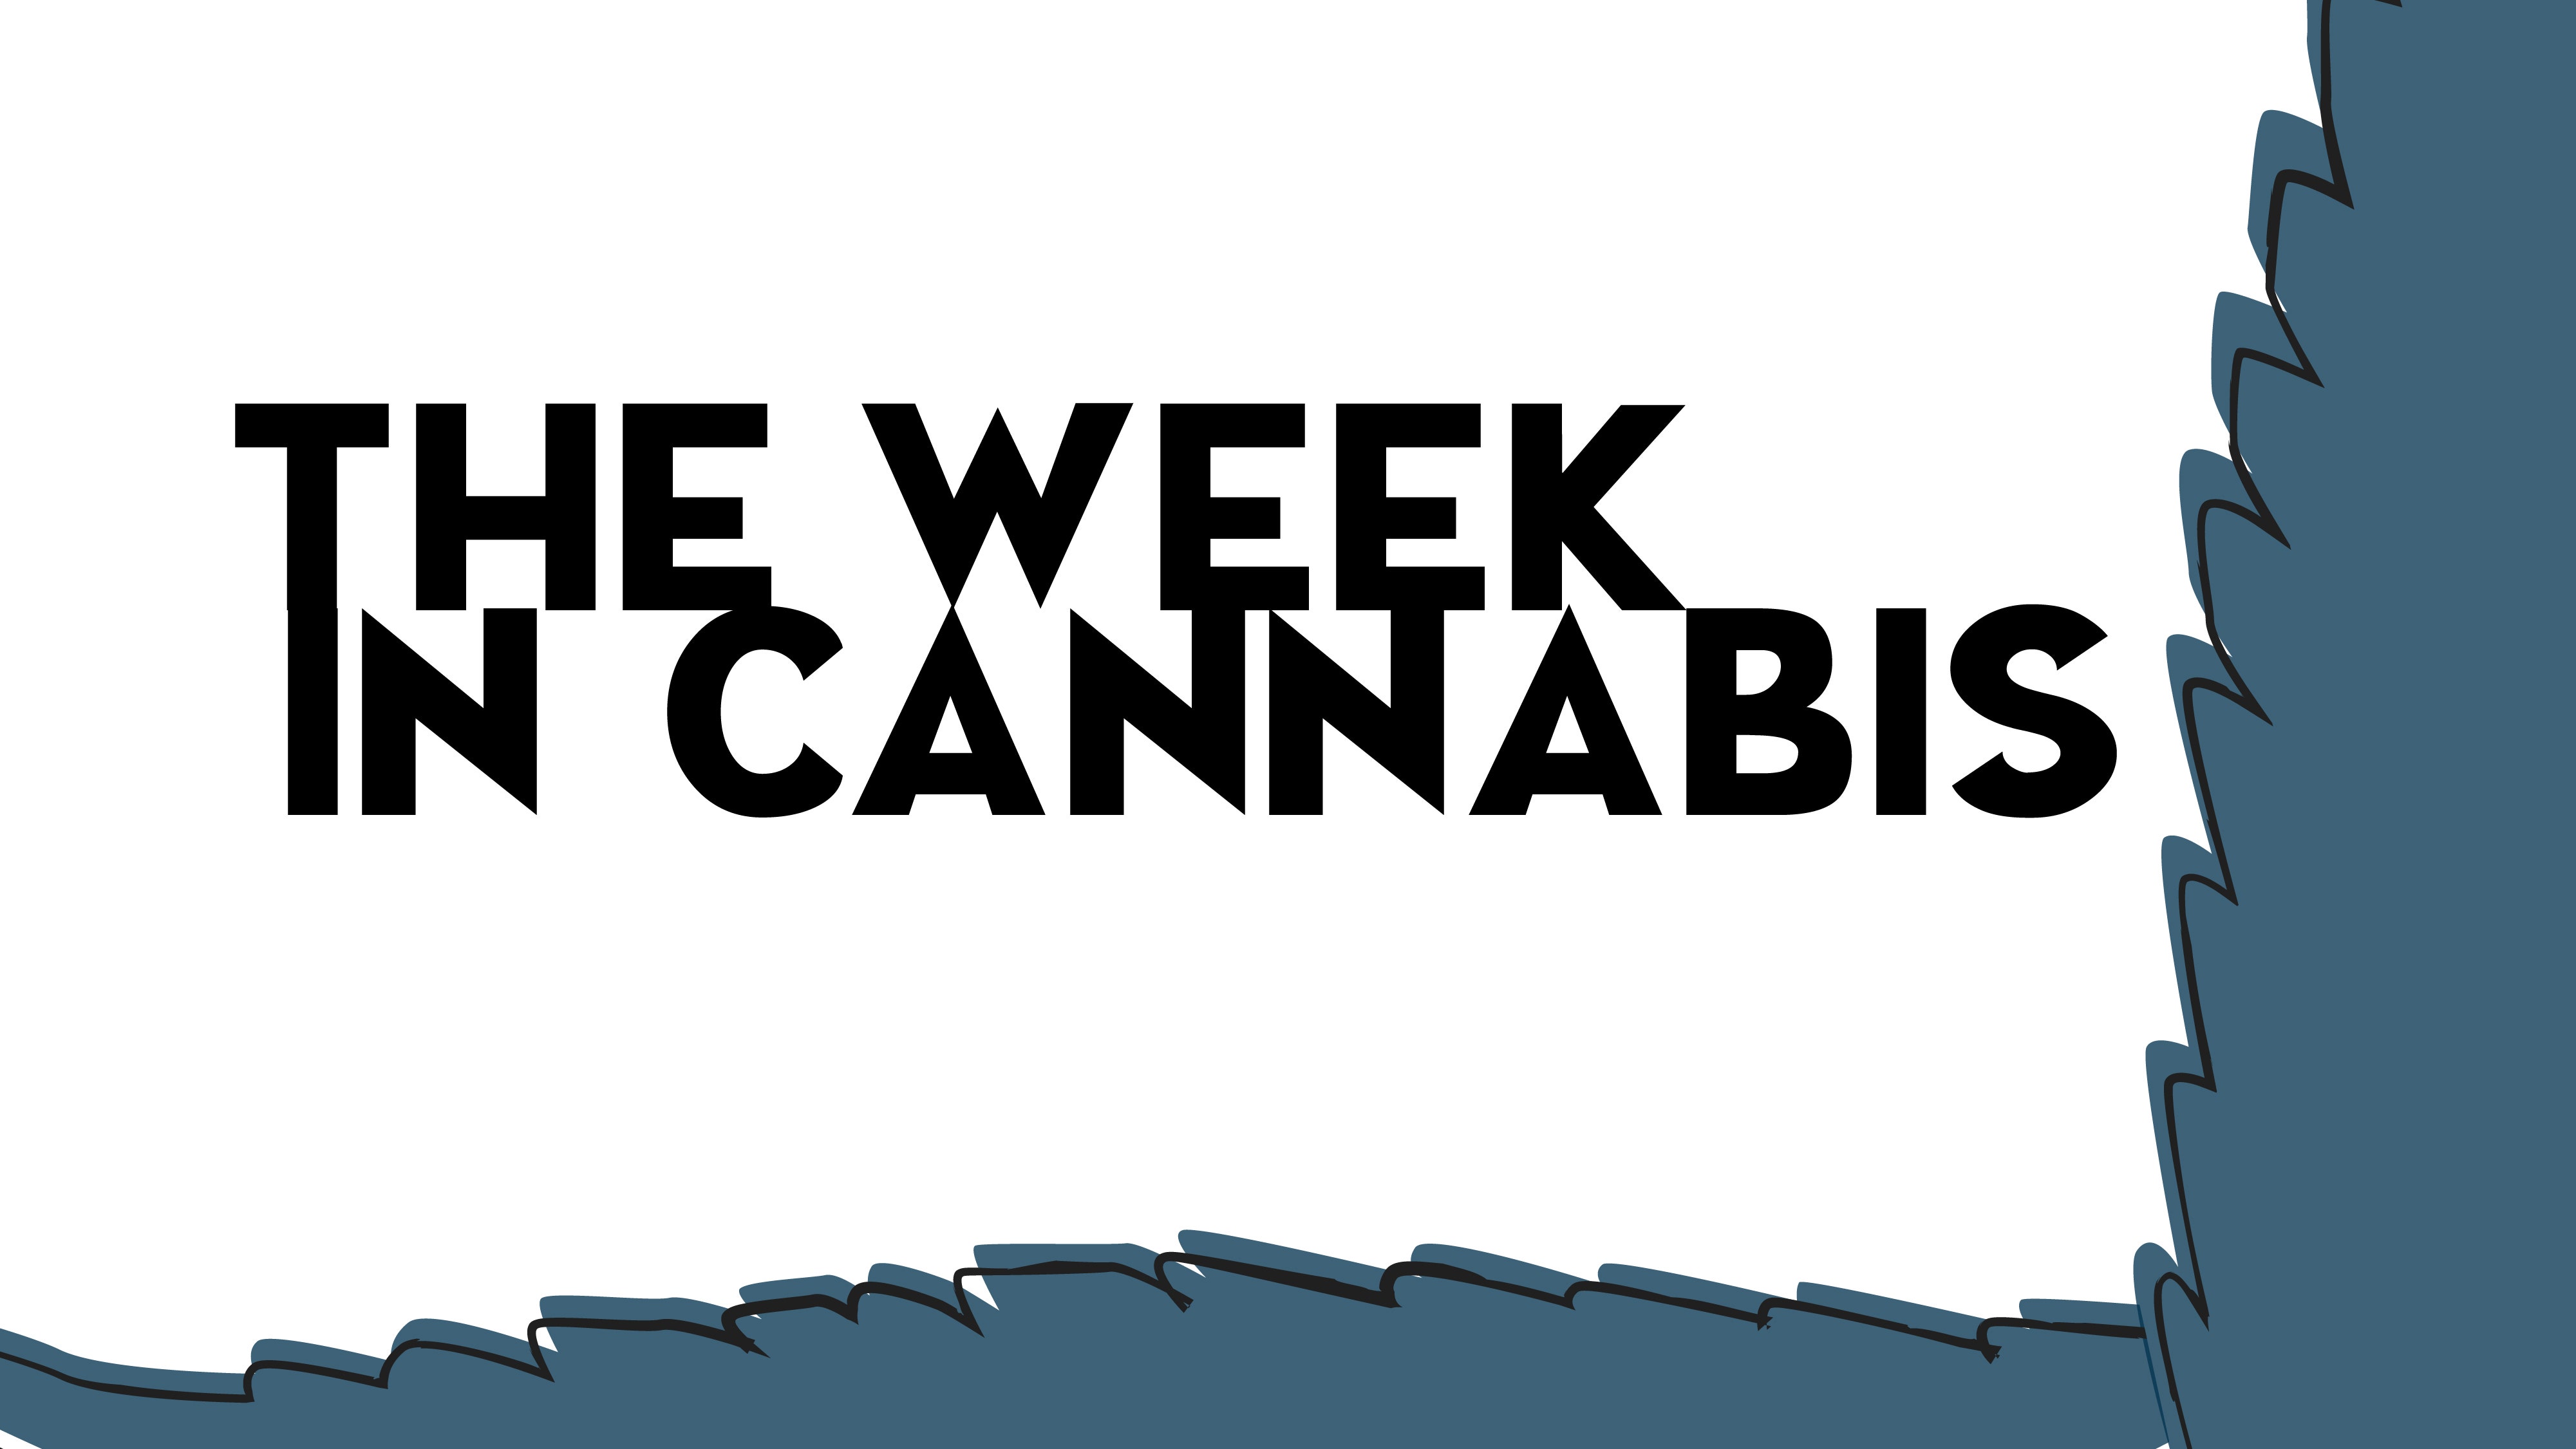 The Week In Cannabis: Tilray Earnings And Reactions, Weed And Covid, Italy, Marijuana At The Airport And More